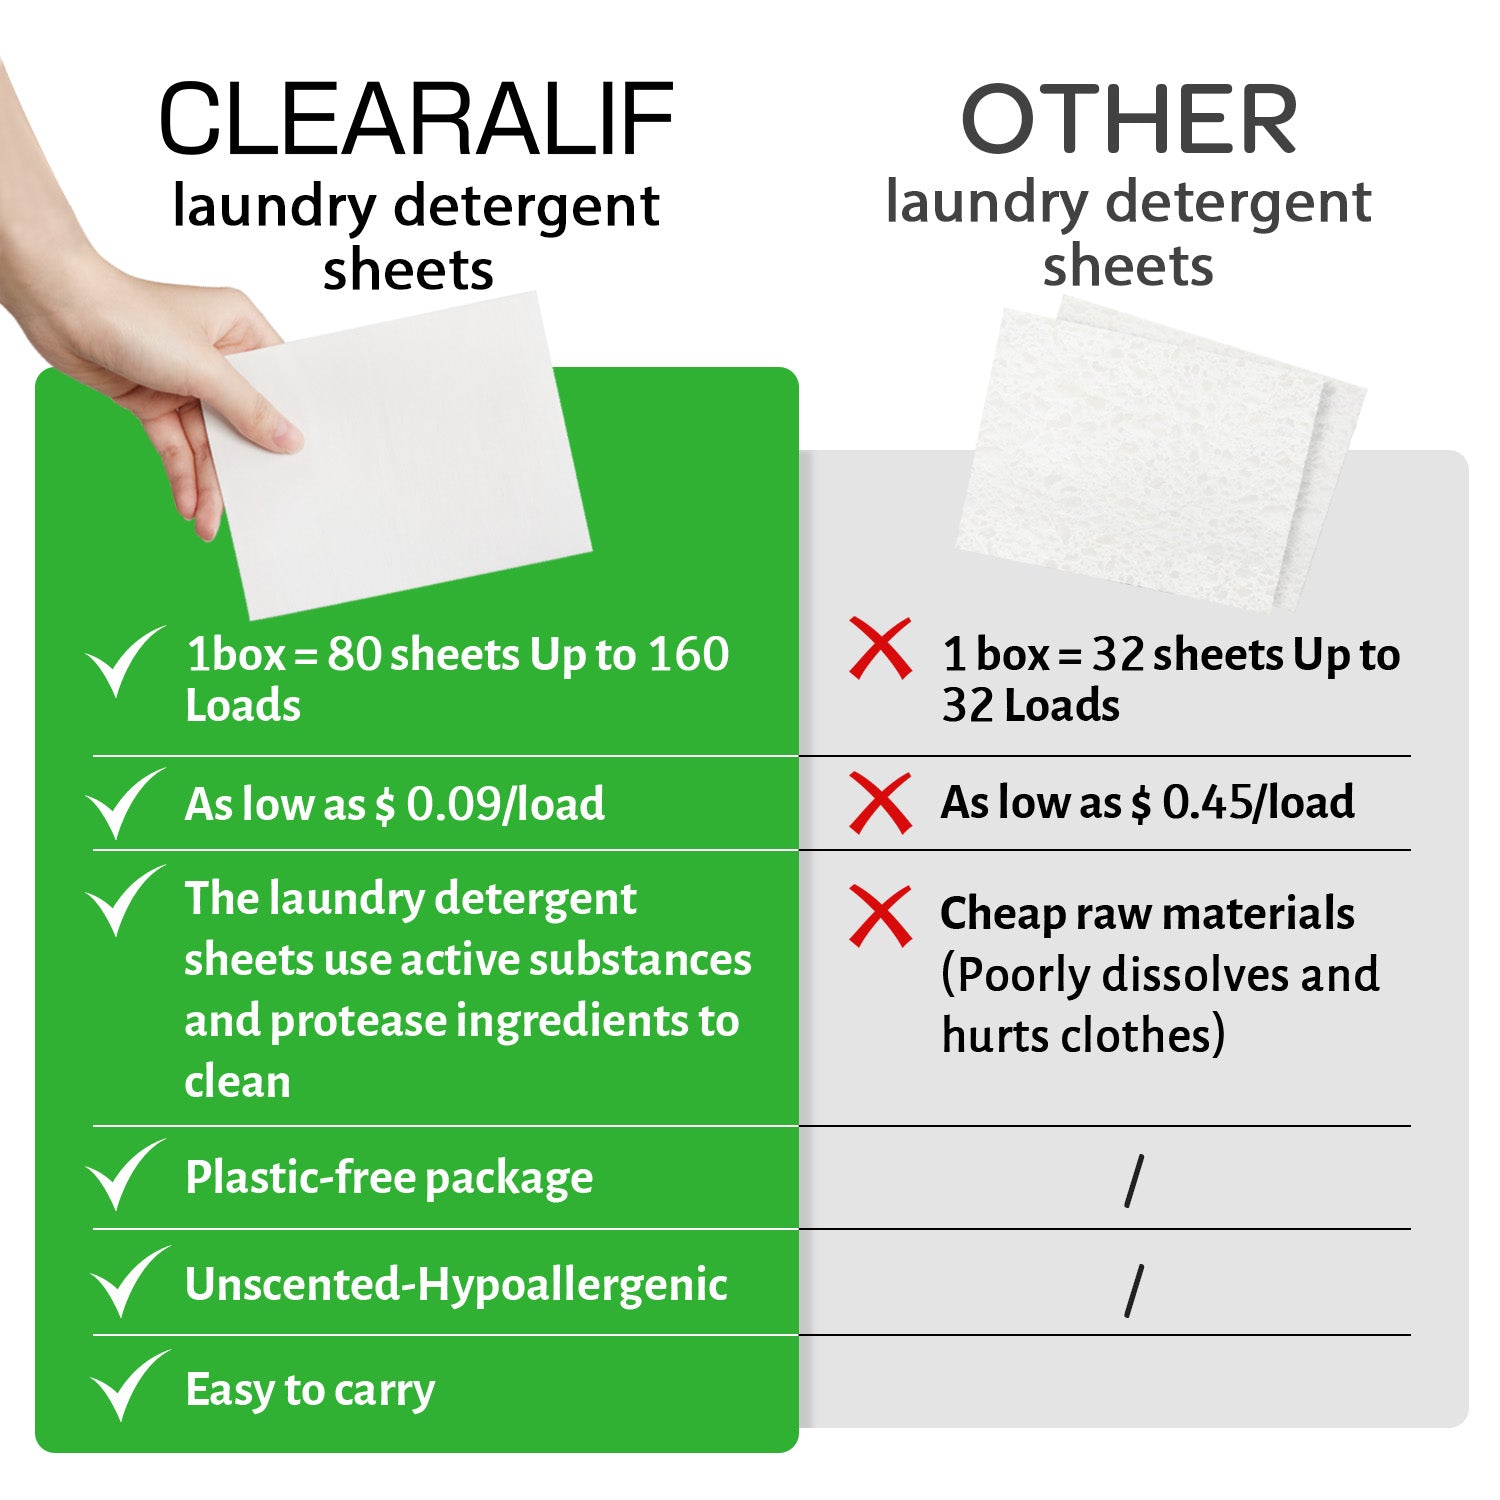 CLEARALIF Laundry Detergent Sheets Wild Mint